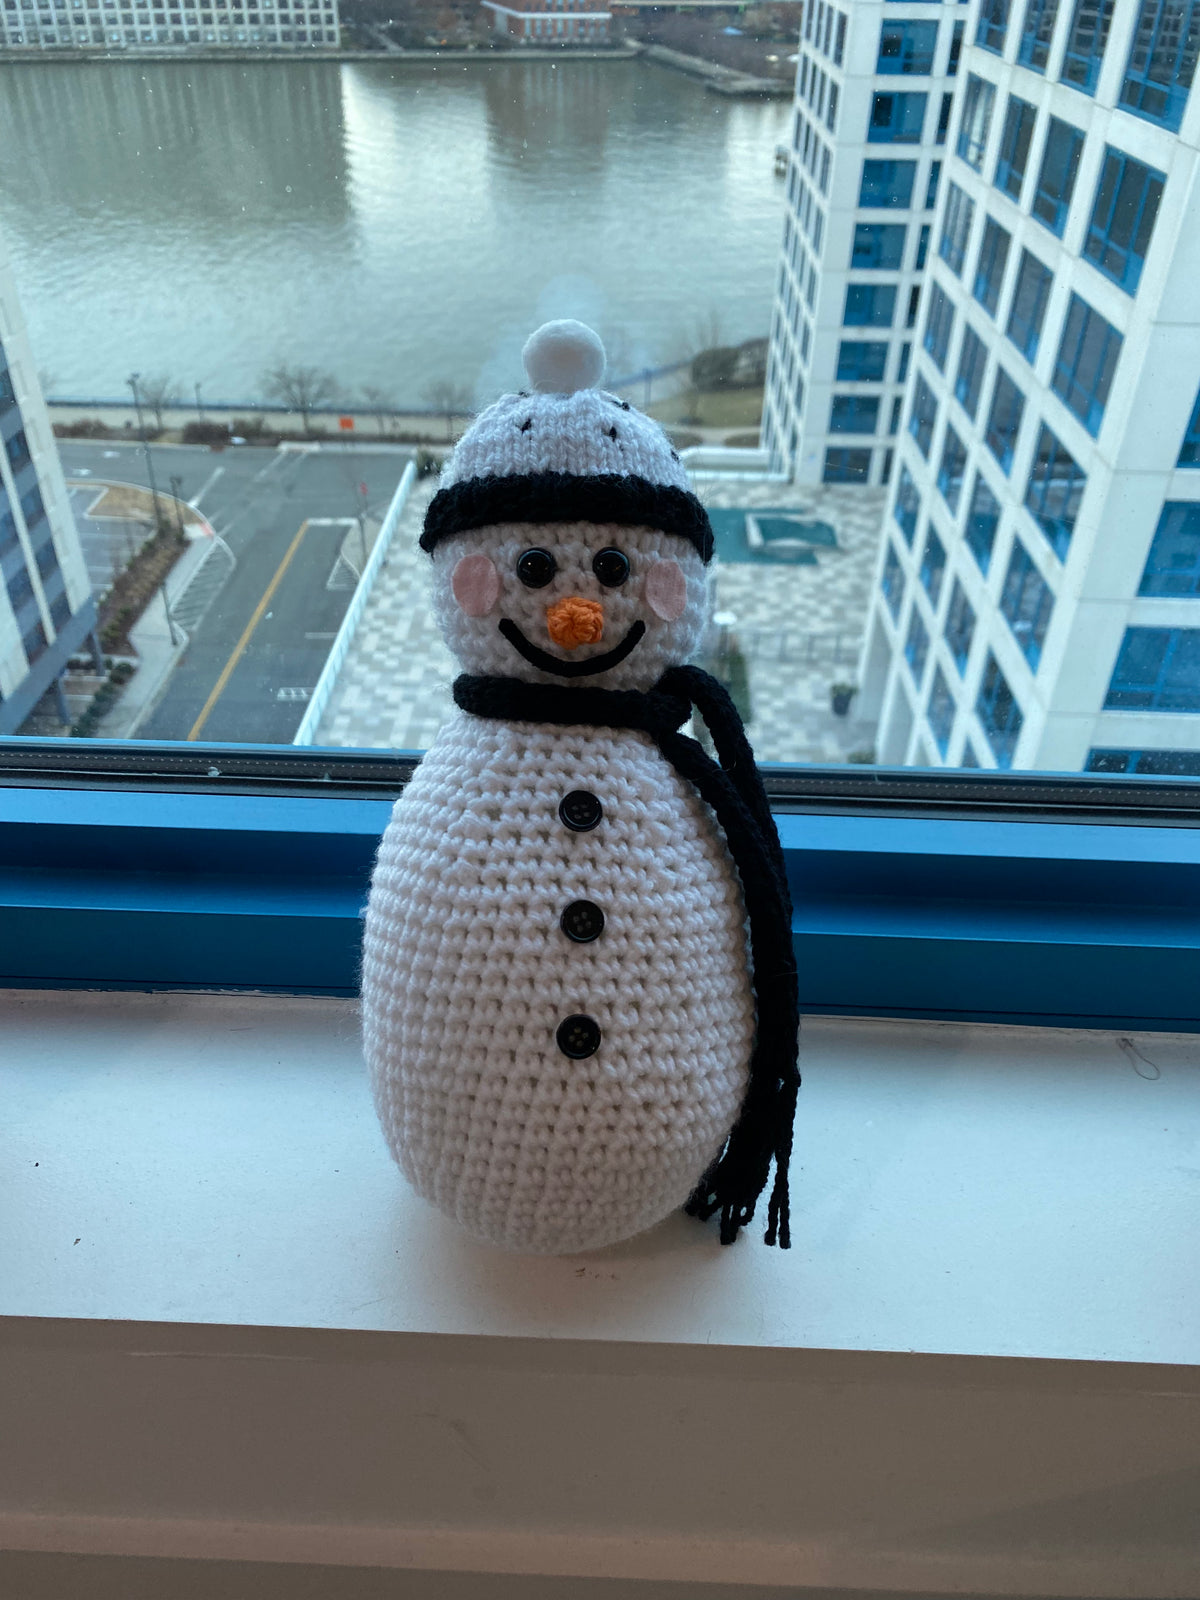 Cute crocheted snowman with plain black scarf and white hat with black hearts